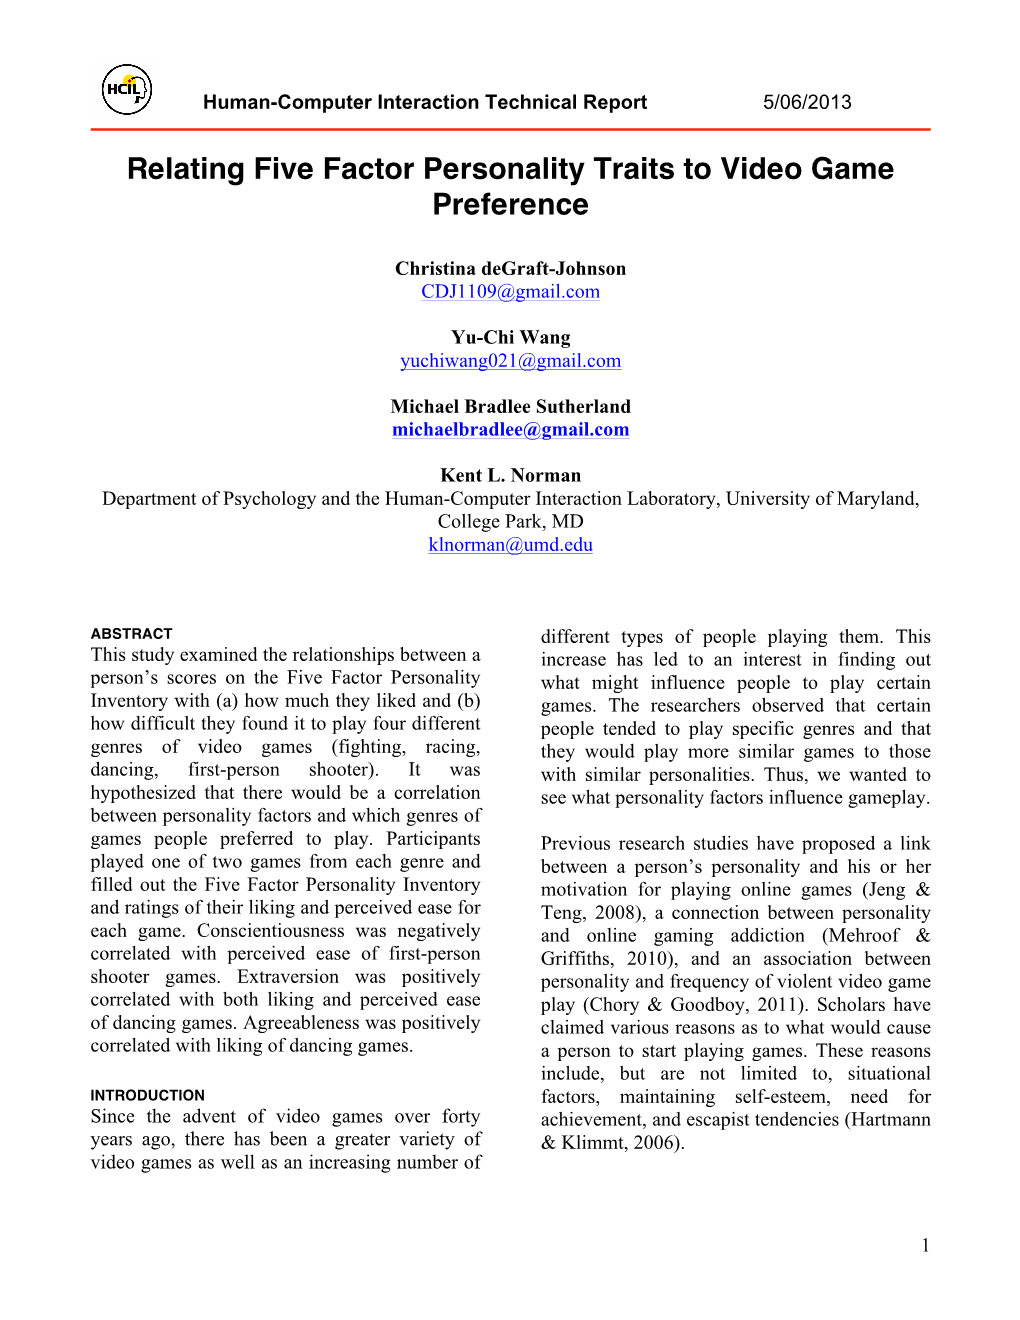 Relating Five Factor Personality Traits to Video Game Preference